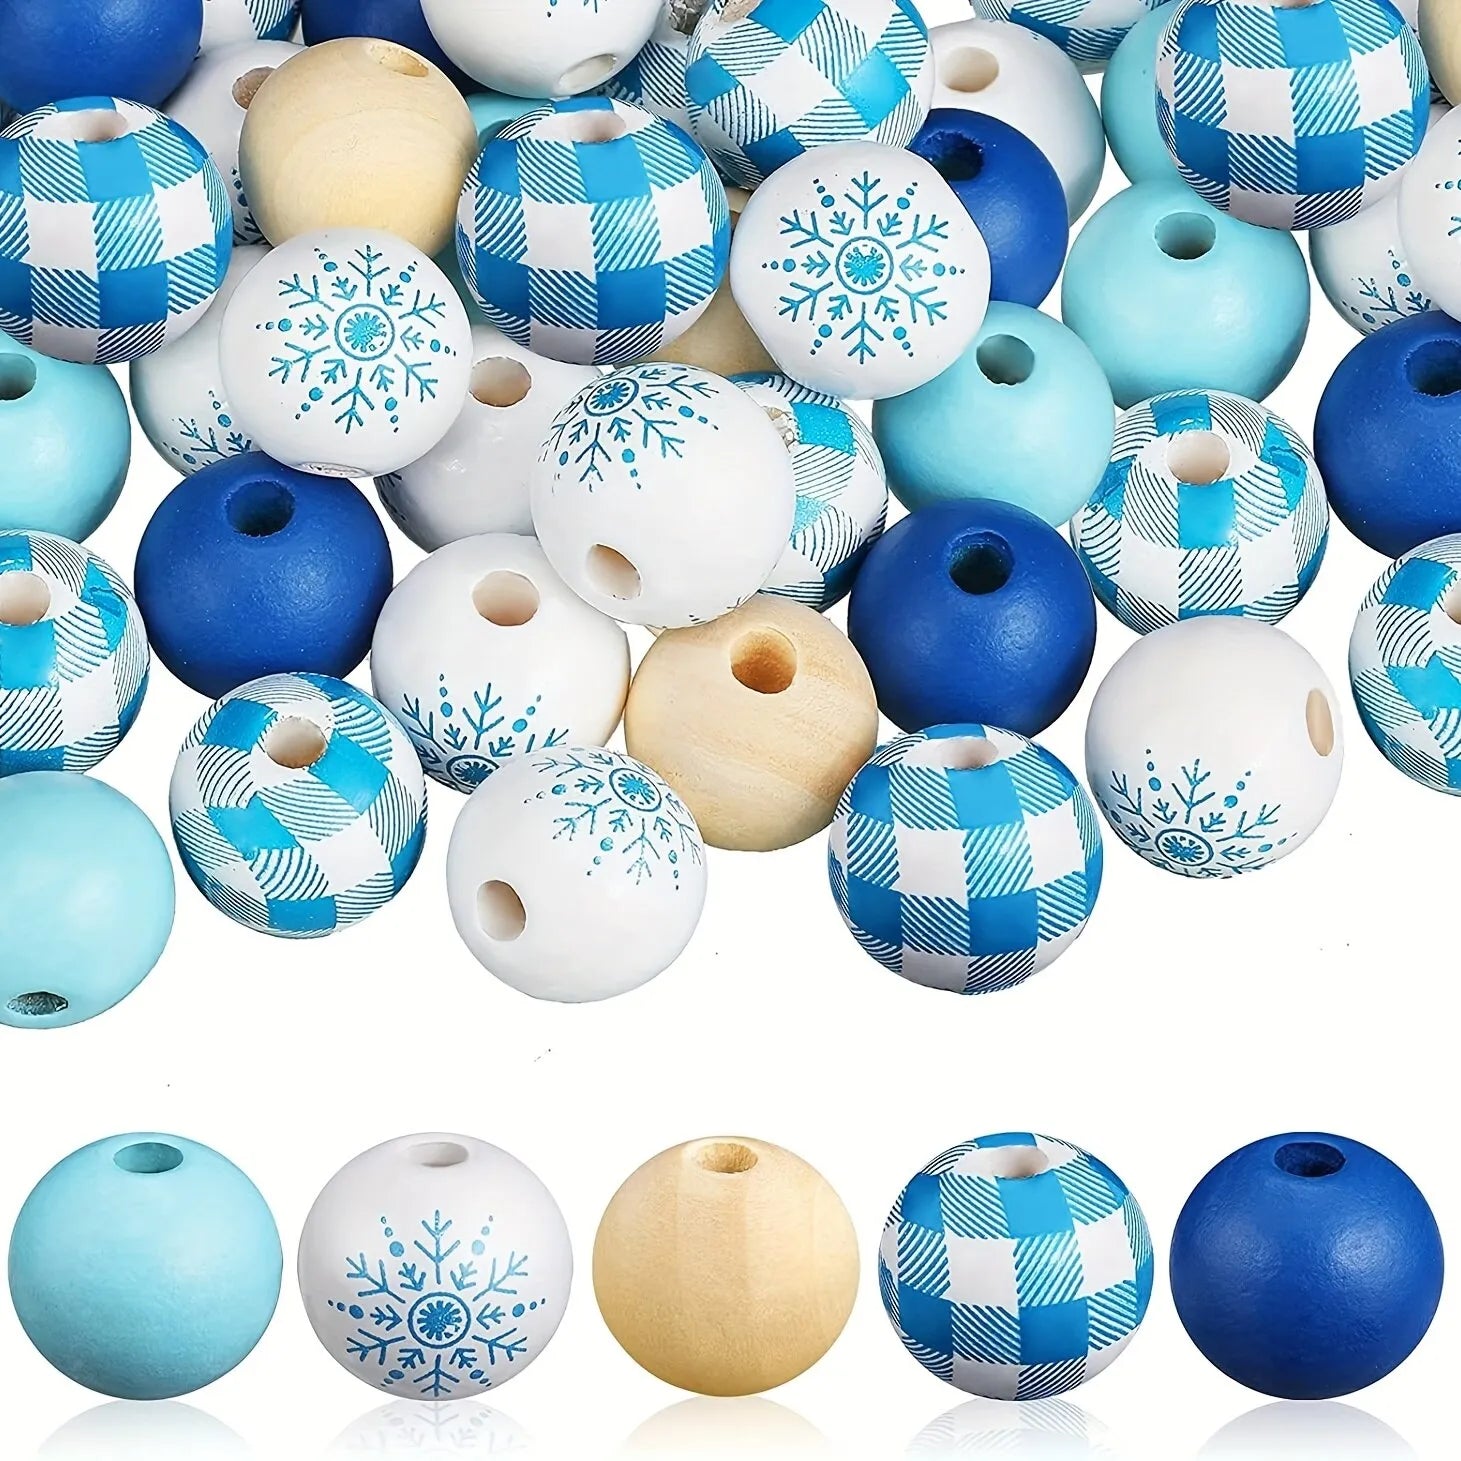 50pcs 16mm Snowflake Pattern Wooden Beads Round Plaid Wooden Beads DIY Craft Beads Home Party Decoration